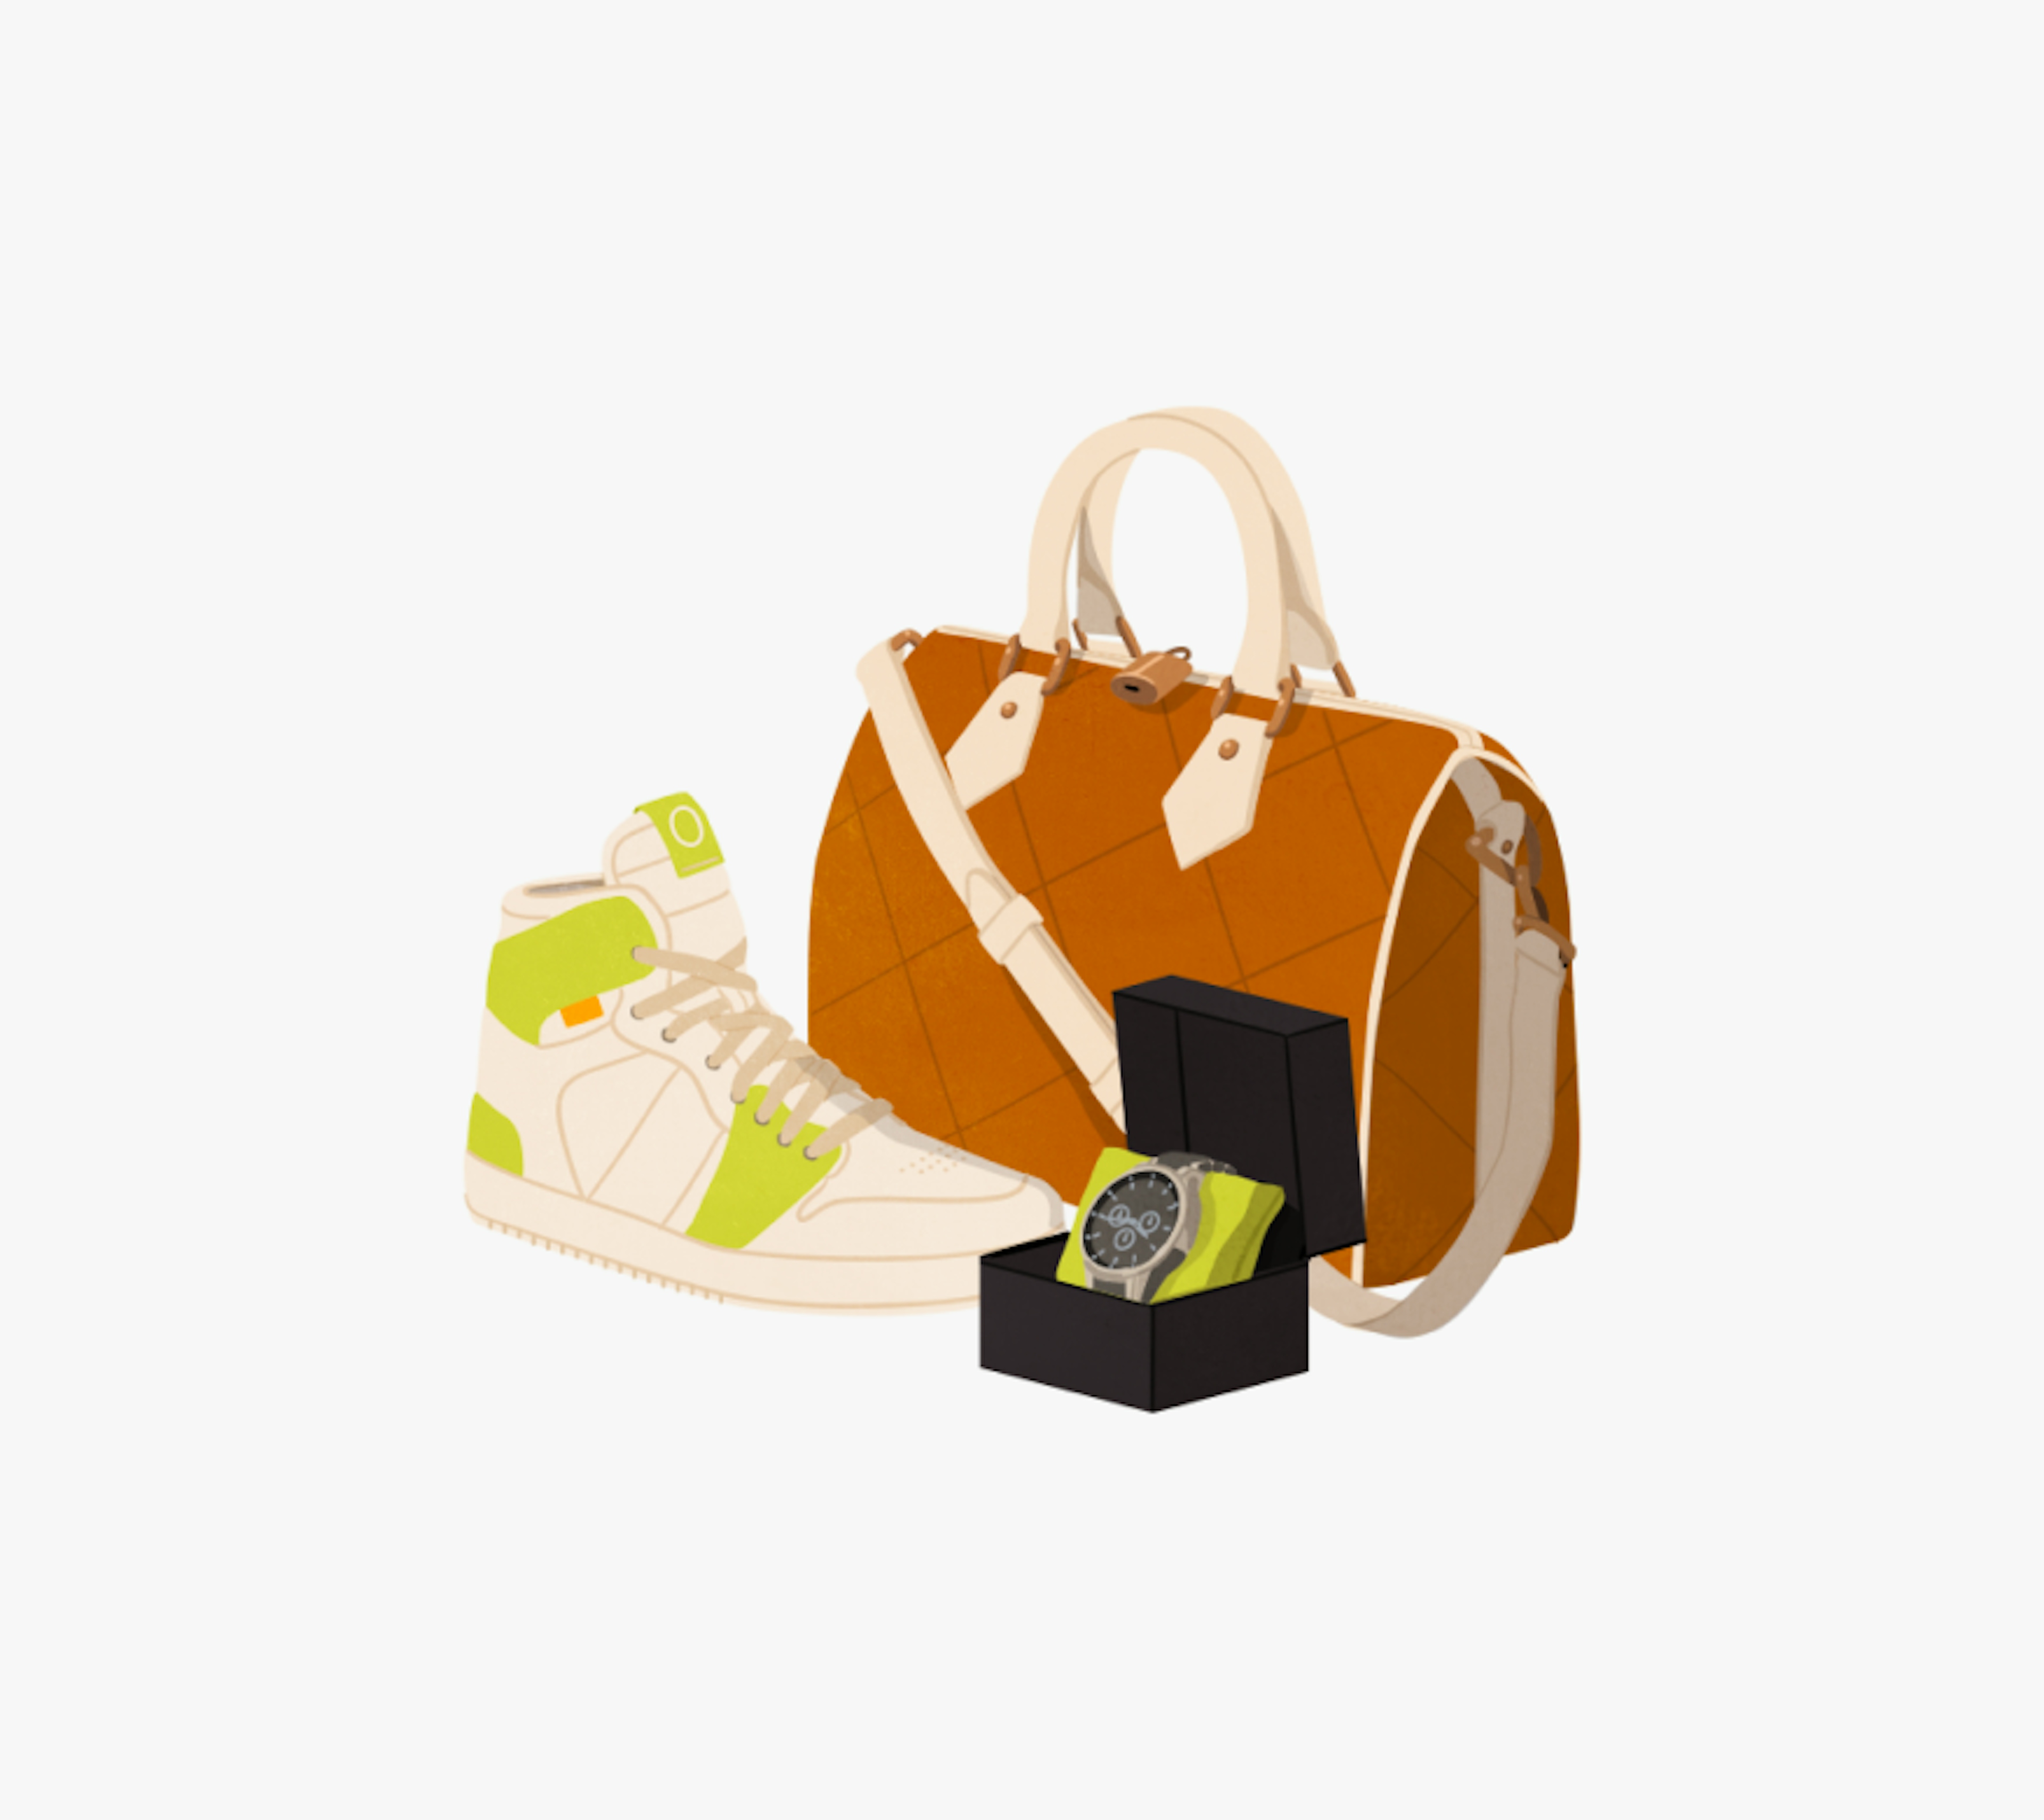 A brown handbag with white straps, a white and lime green high-top sneaker, and a wristwatch with a dark face displayed in an open black box are arranged together.